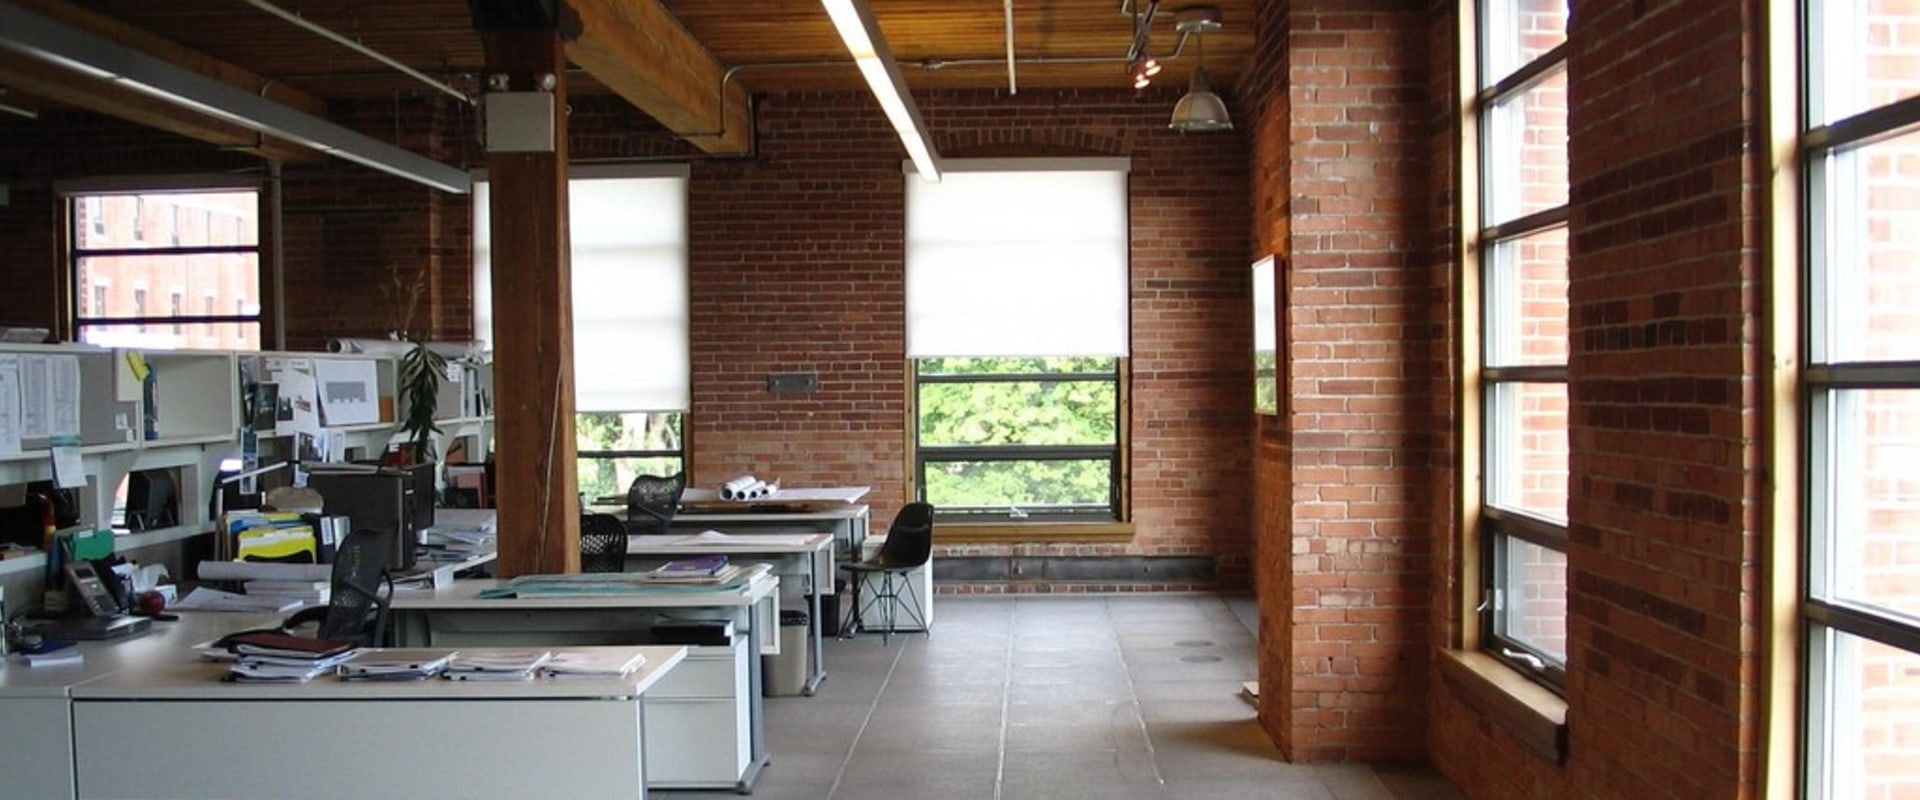 Why is the traditional office space better than a coworking space?